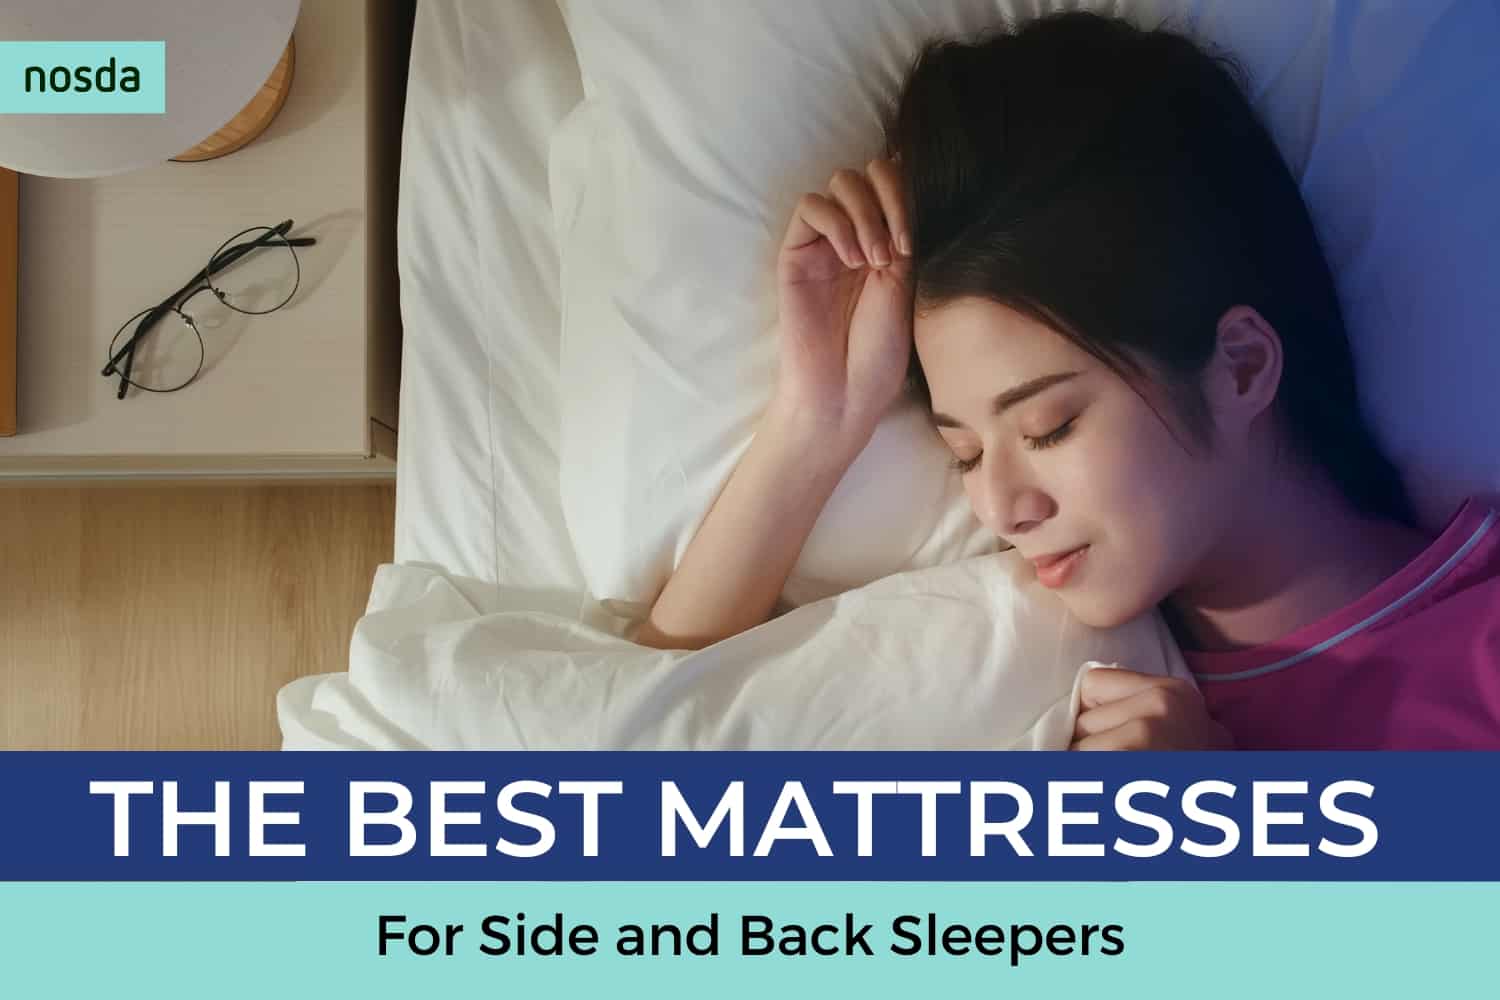 The Best Mattresses for Side and Back Sleepers